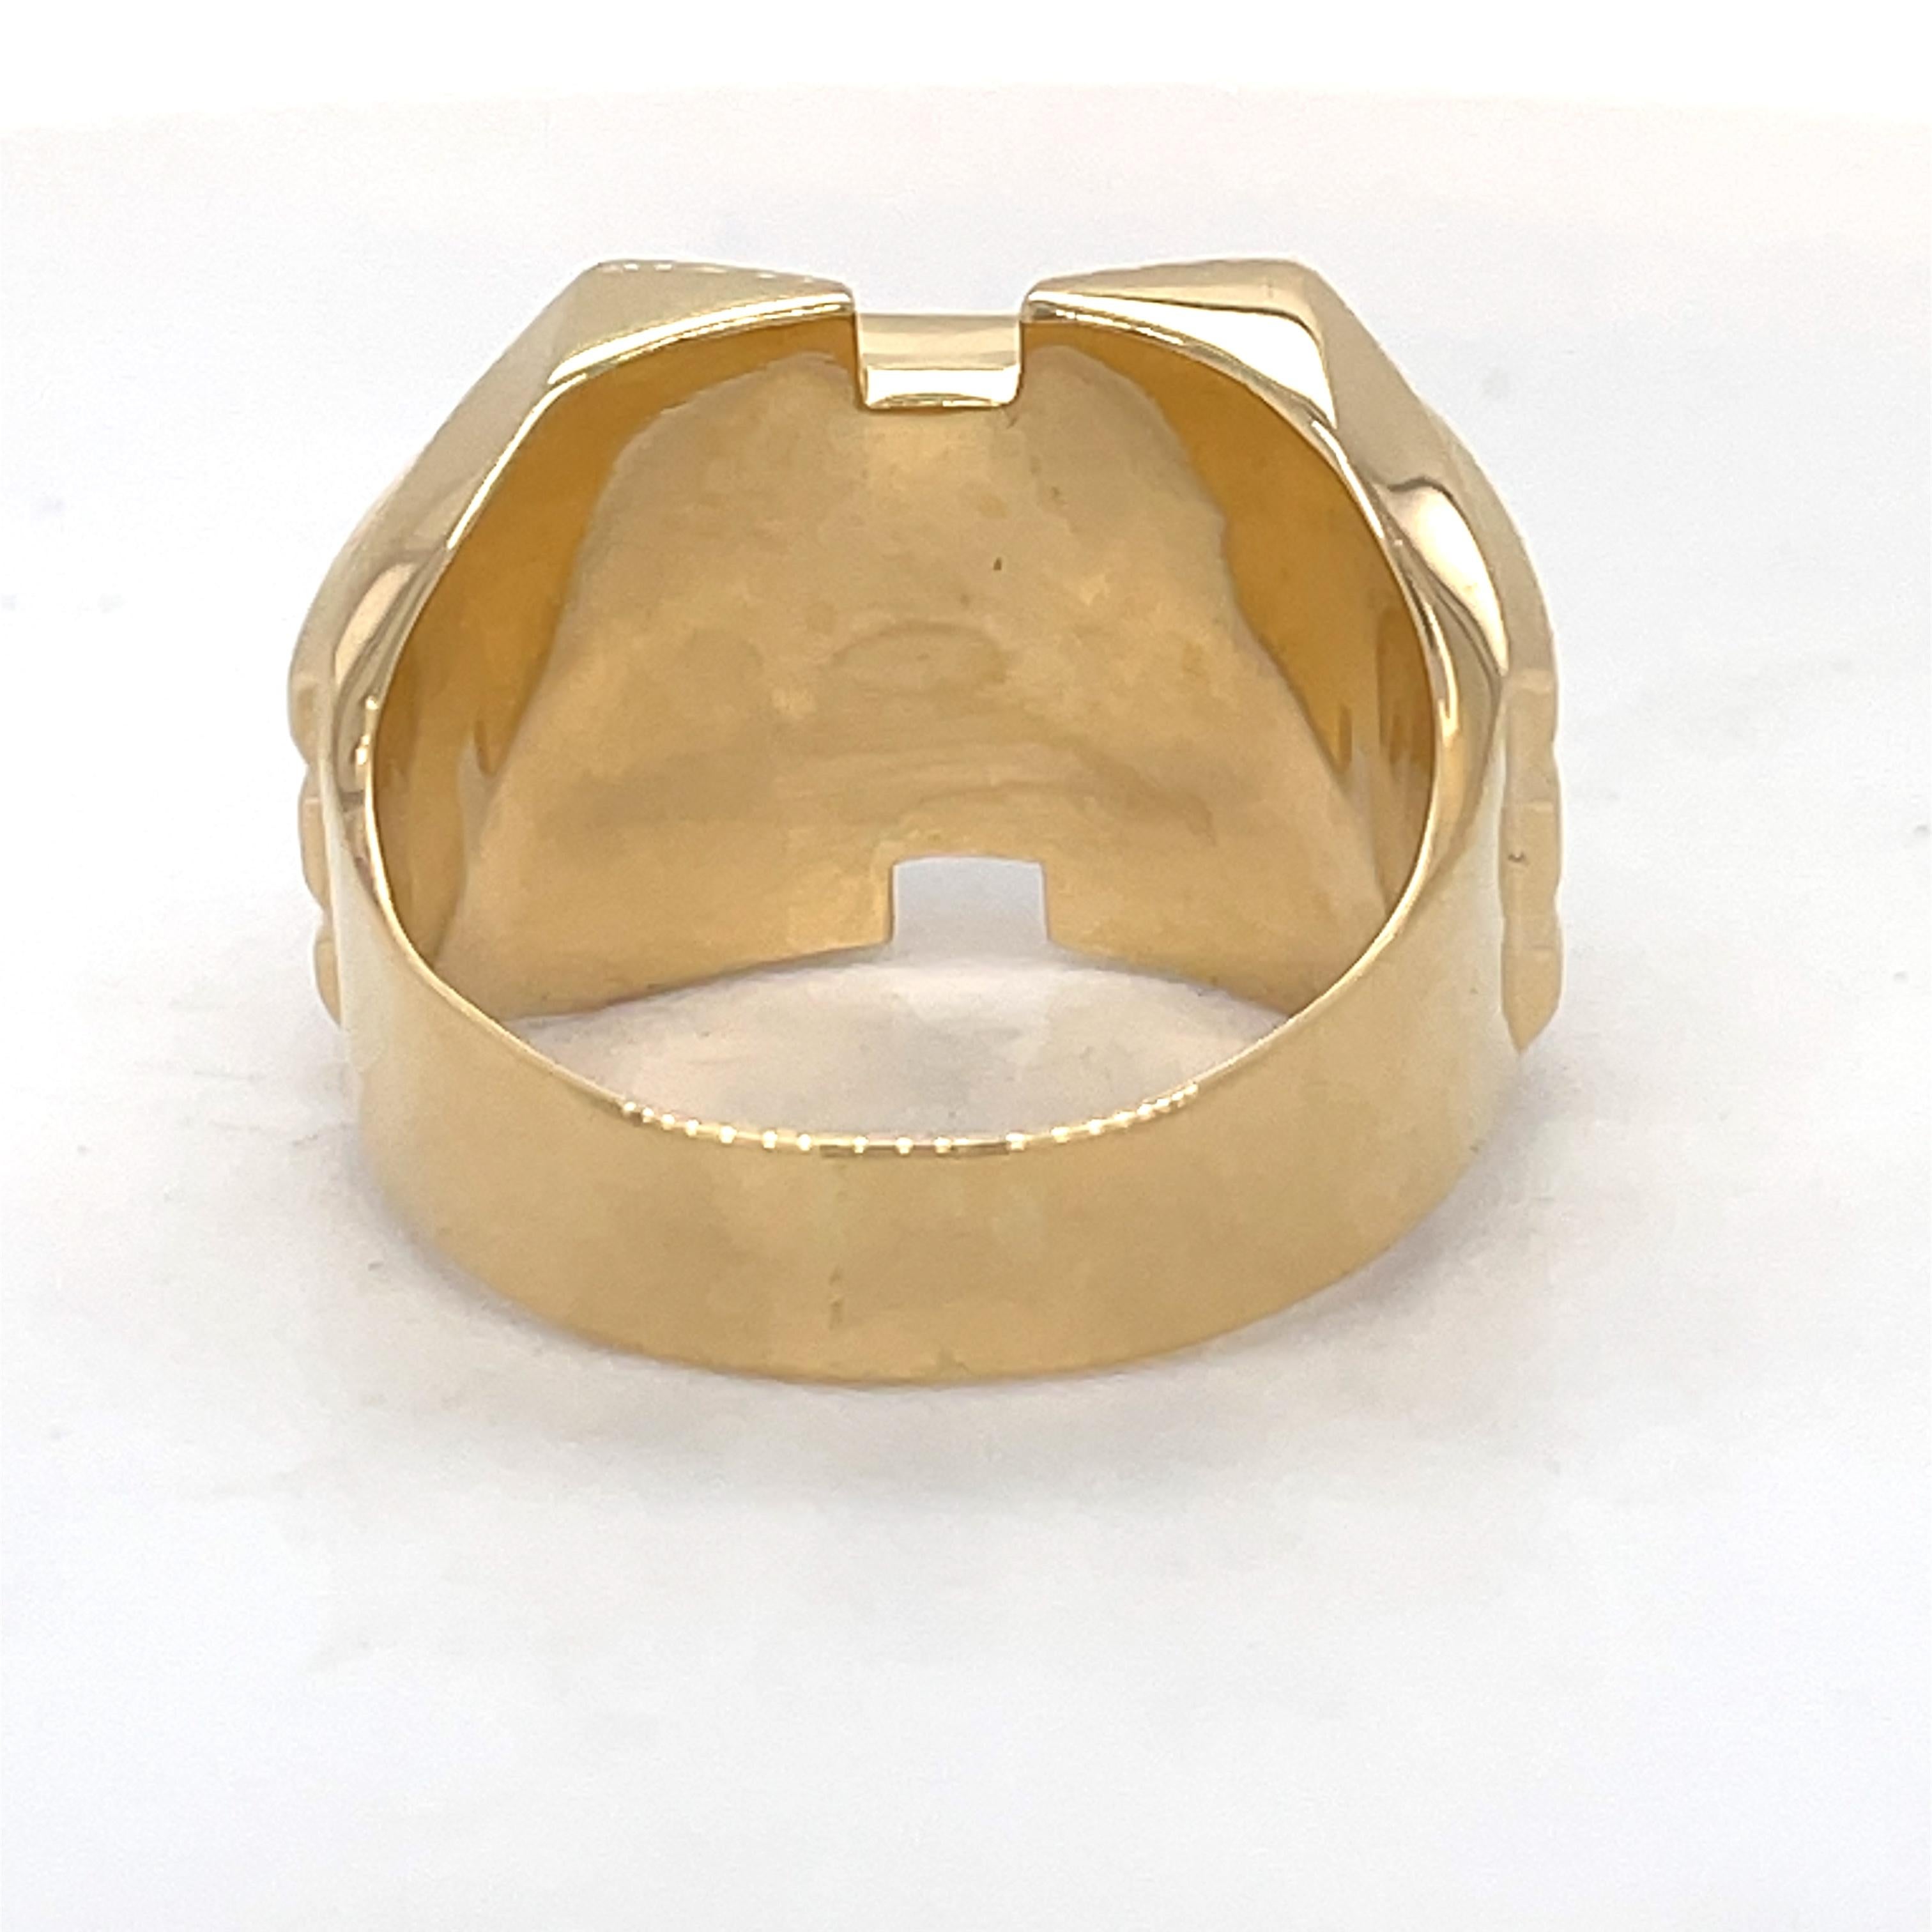 Unisex Gold Signet Ring, Vintage Style Ring, 14k Yellow Gold, made to order ring For Sale 2